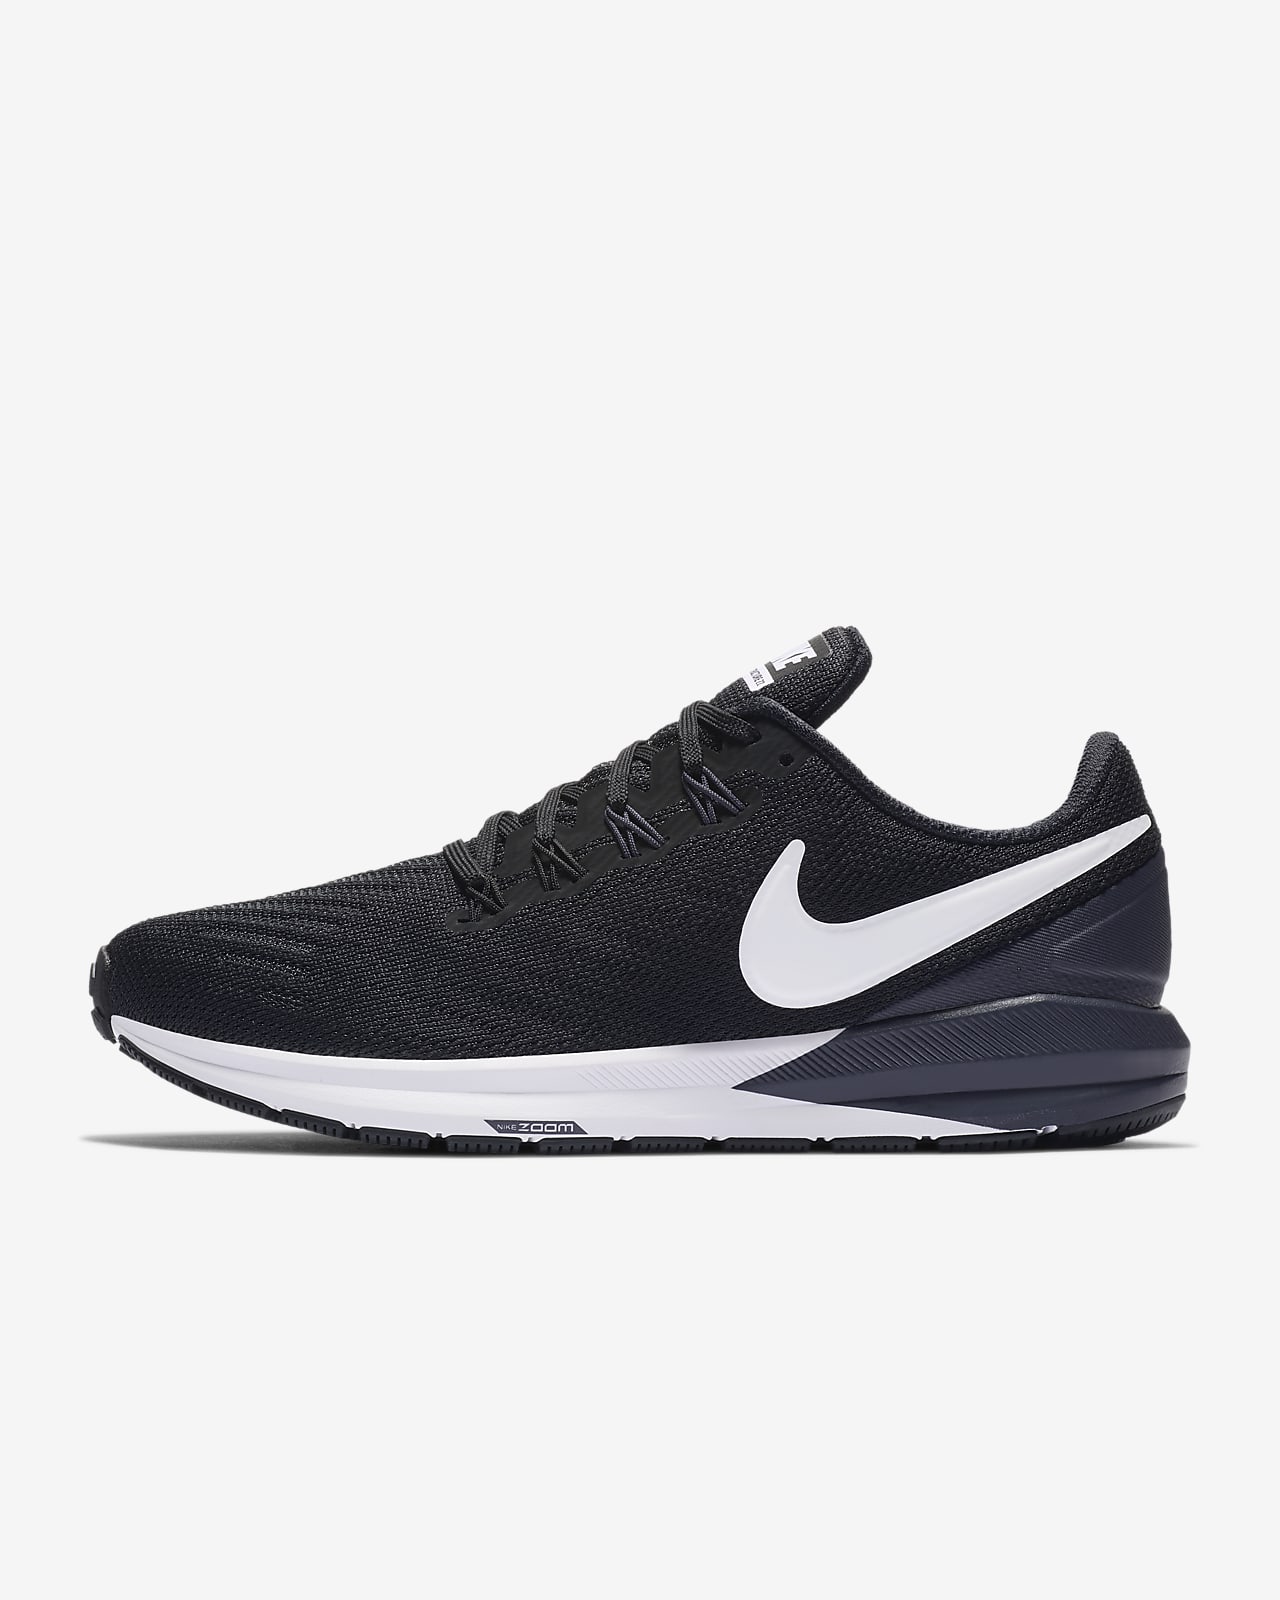 Nike Air Zoom Structure 22 Women's 